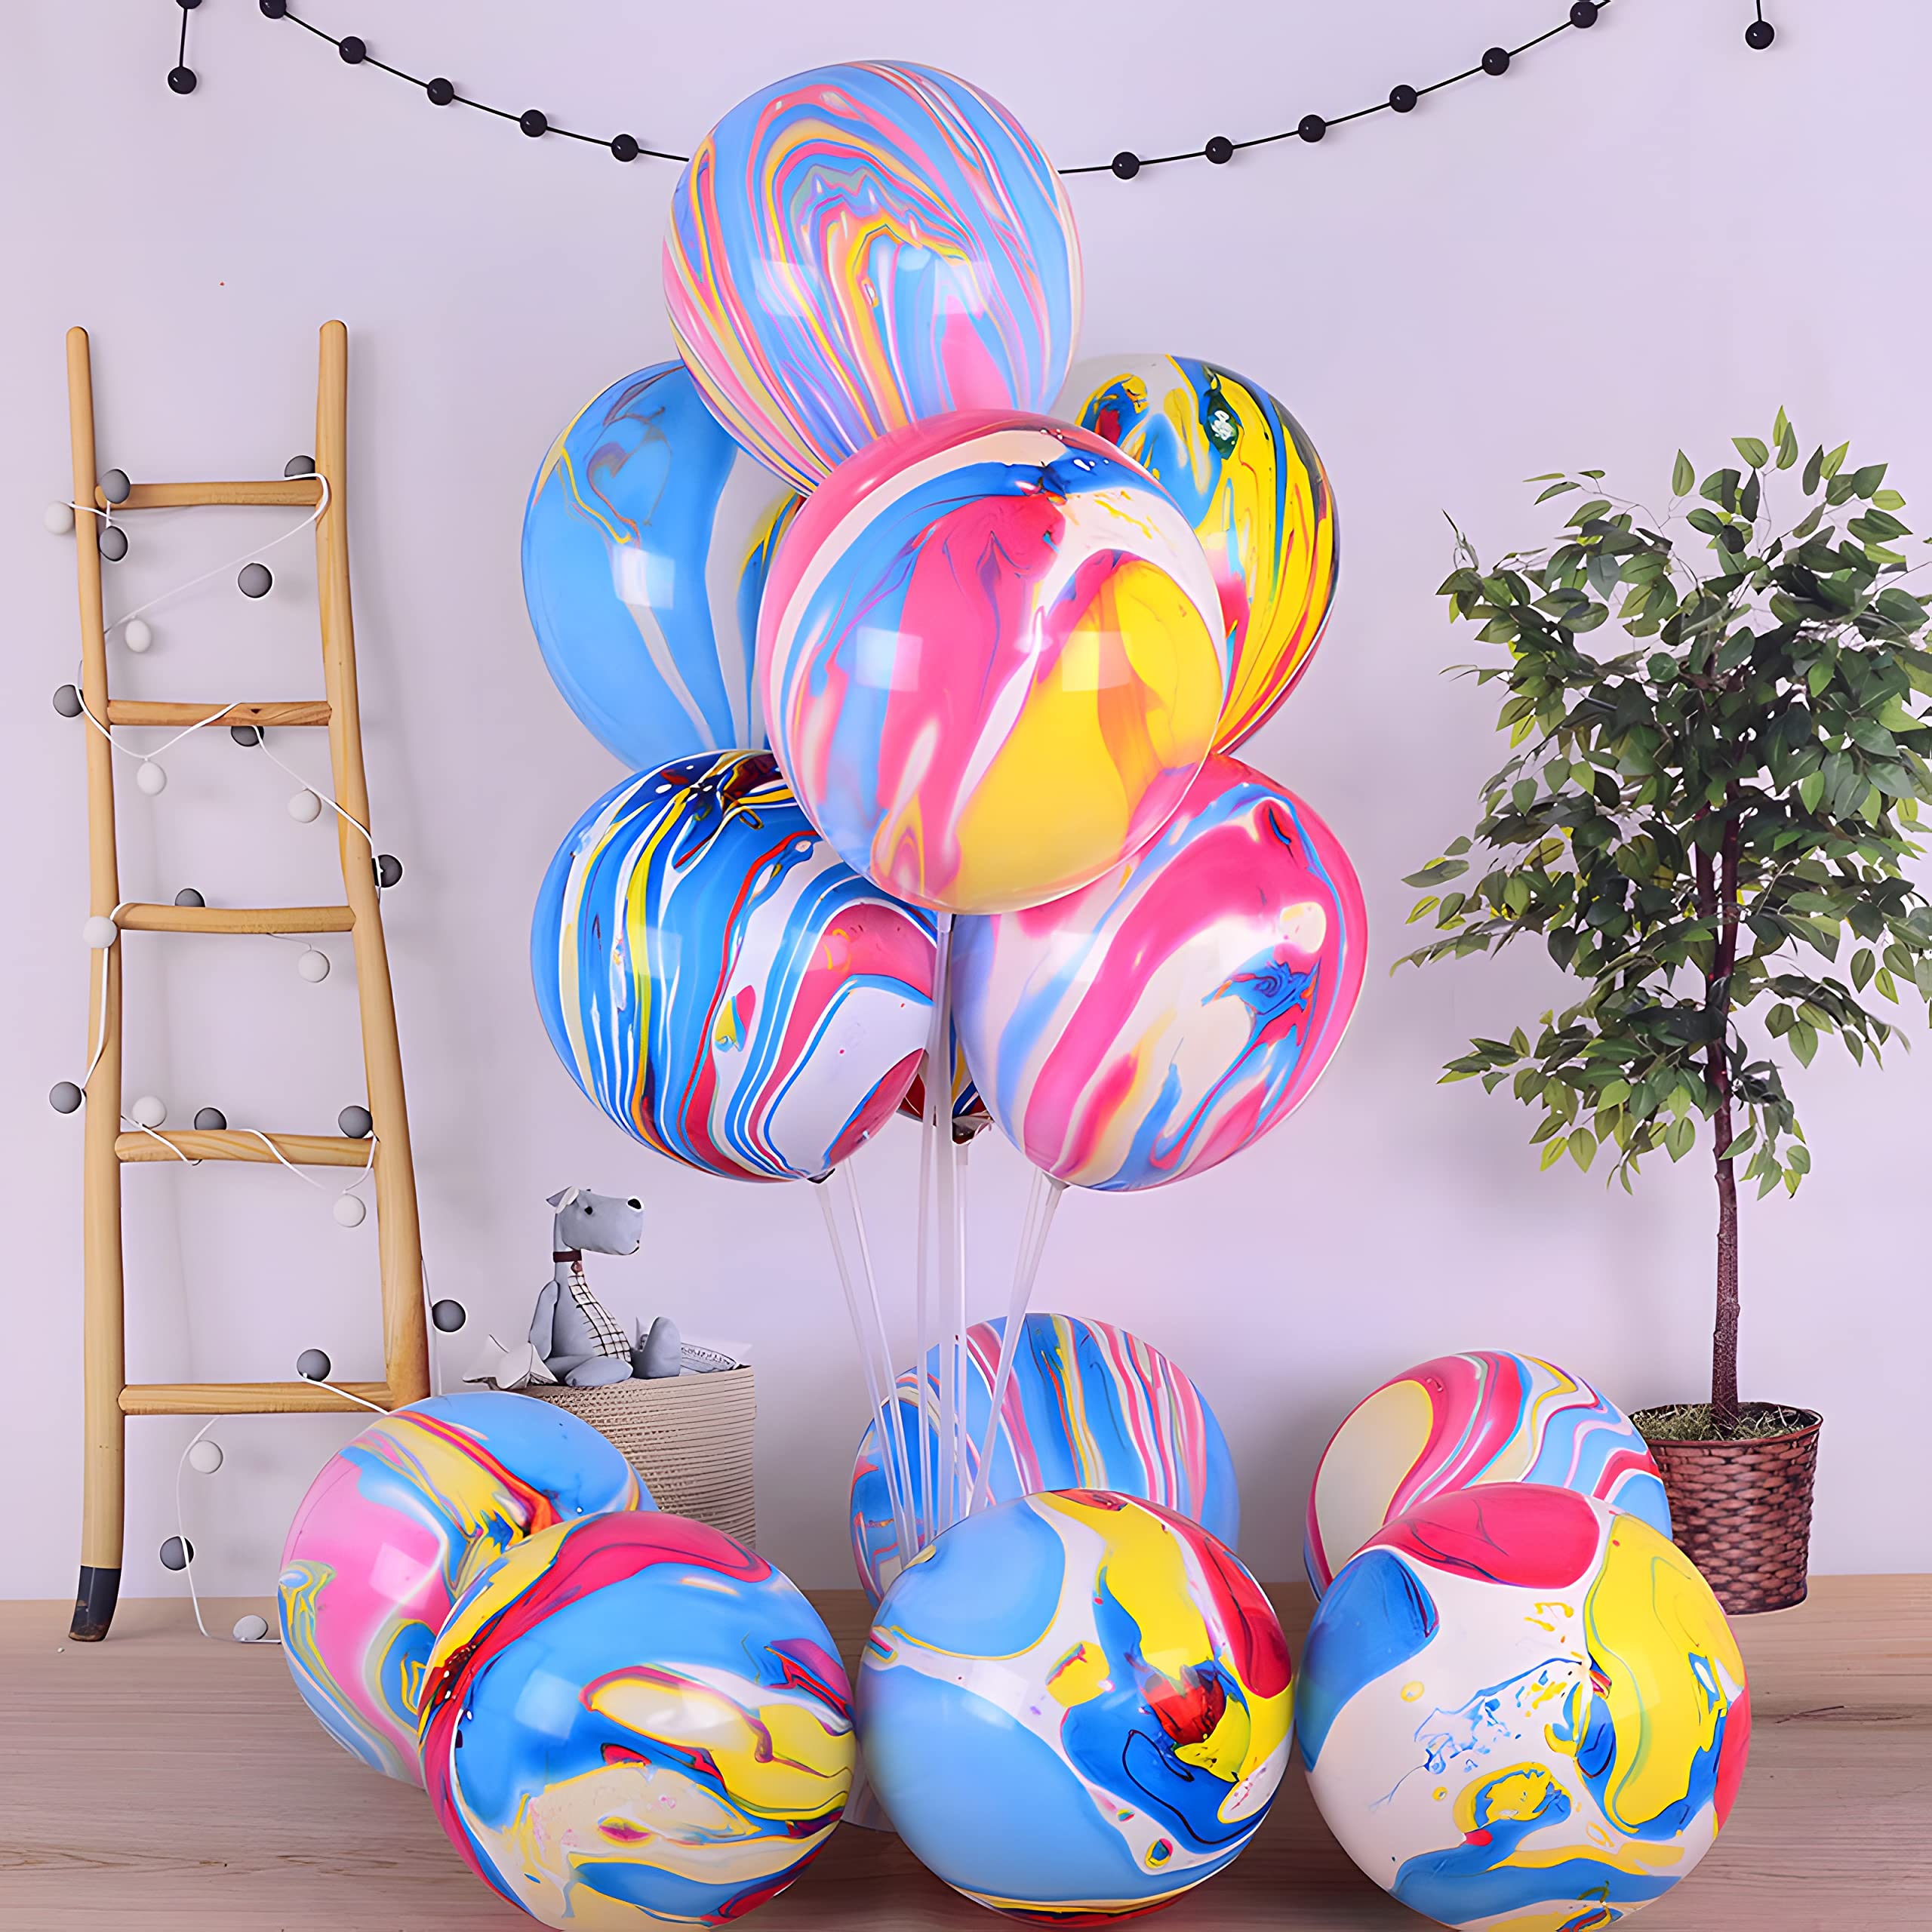 12 Inch Rainbow Tie Dye Balloons 30PCS Agate Marble Latex Swirl Balloons For Tie Dye Birthday Party Supplies,Candyland,Bachelorette,Fun Hippie Party Decorations